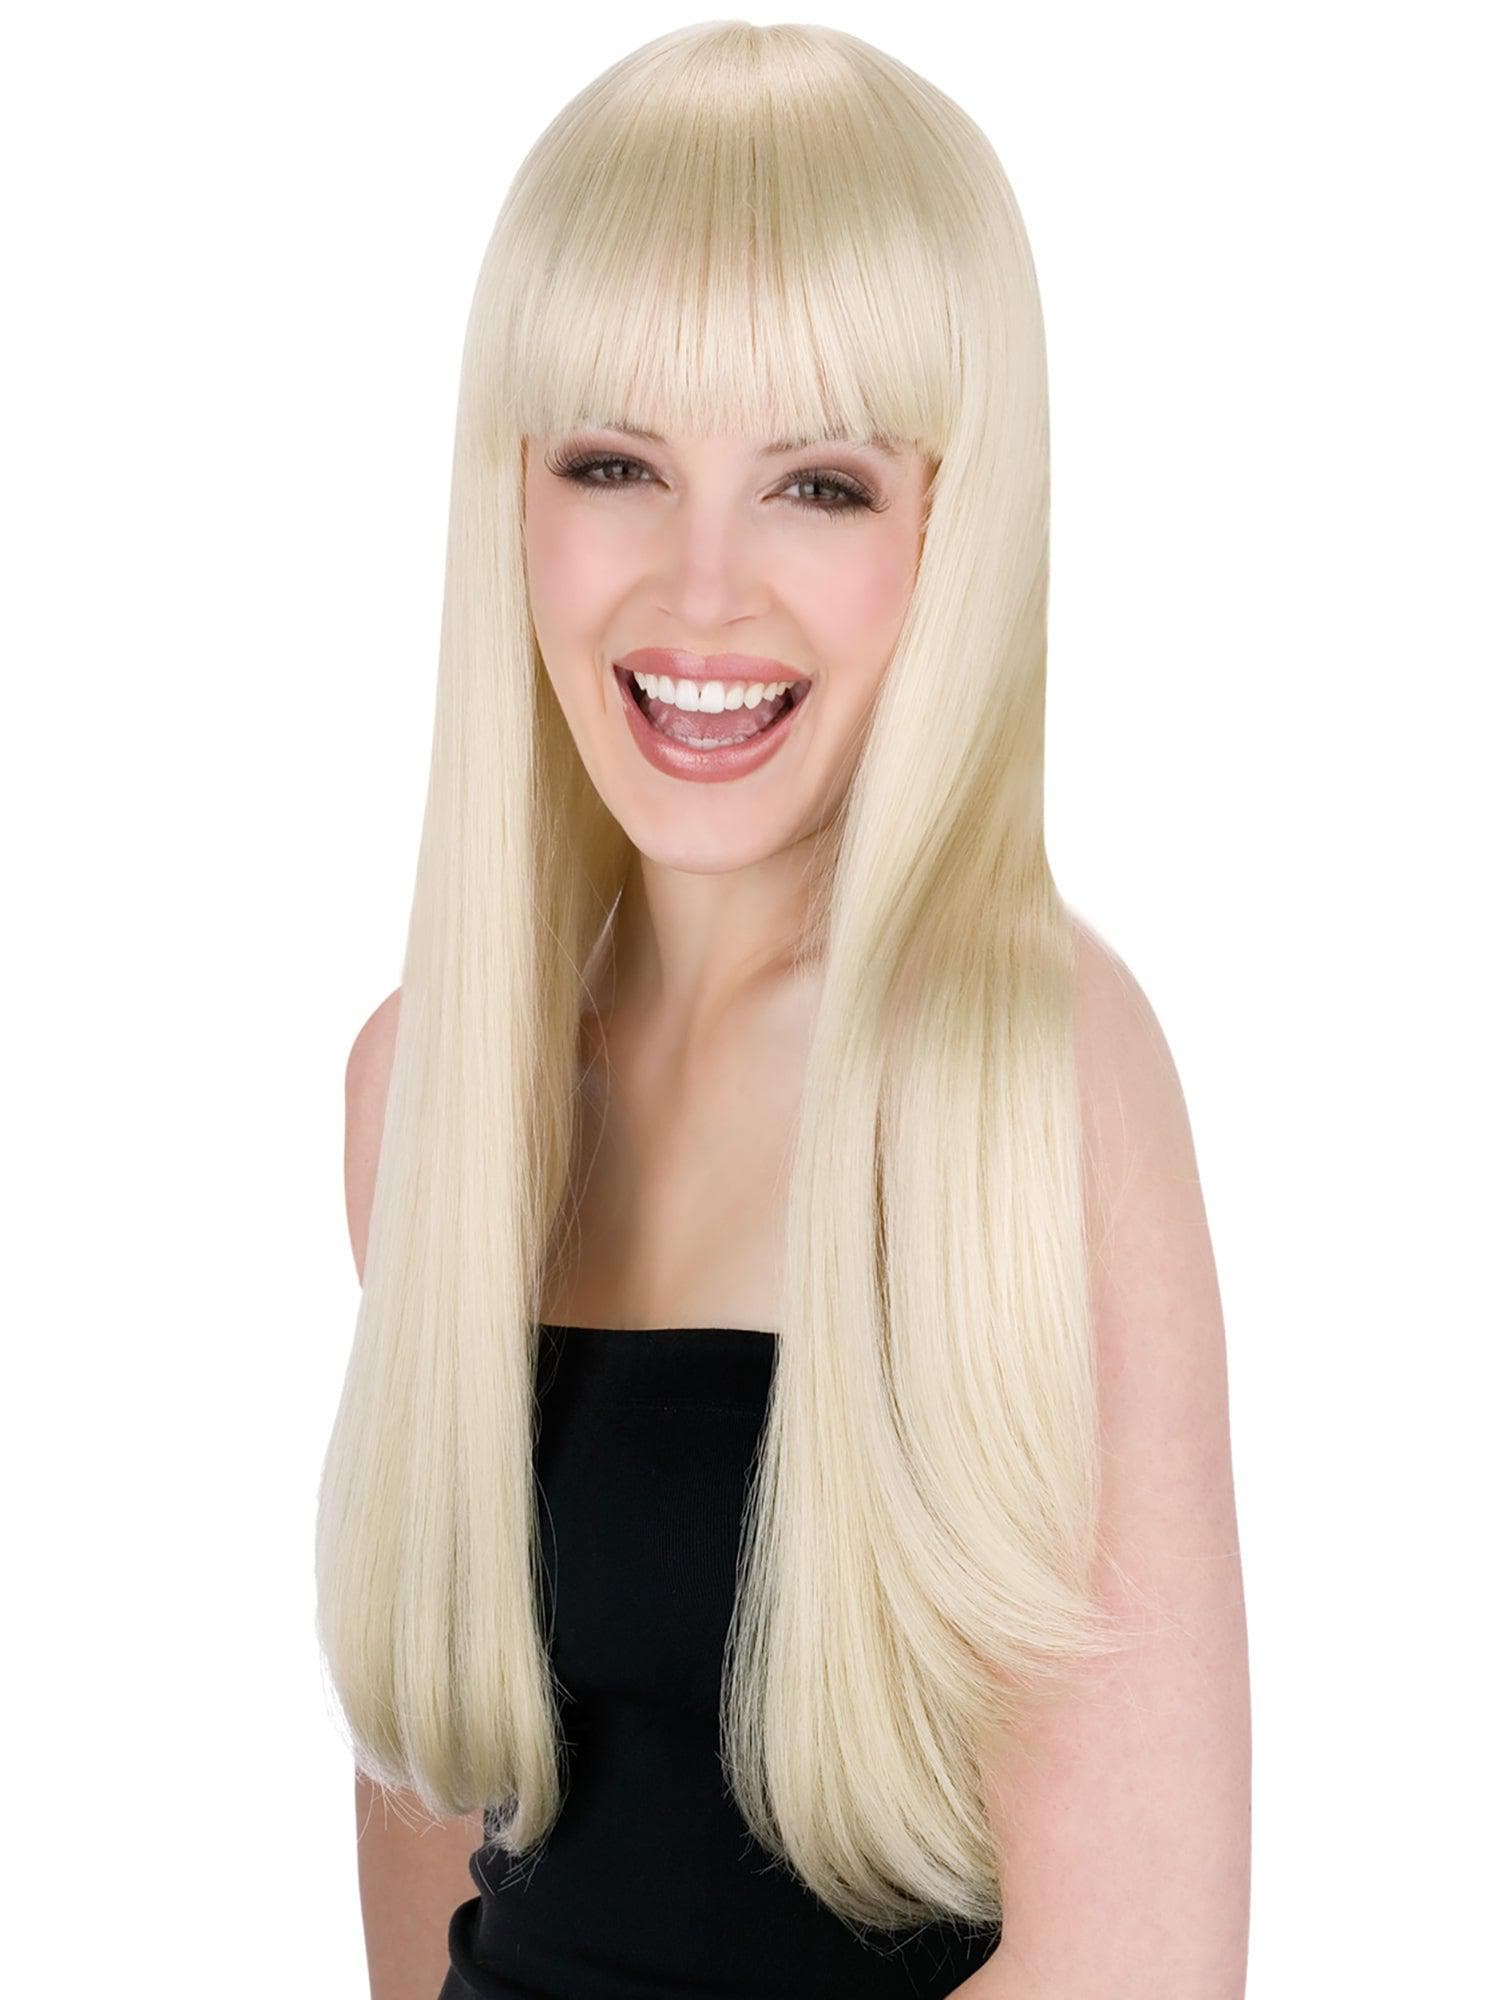 Women's Blonde Pop Star Wig with Bangs - costumes.com